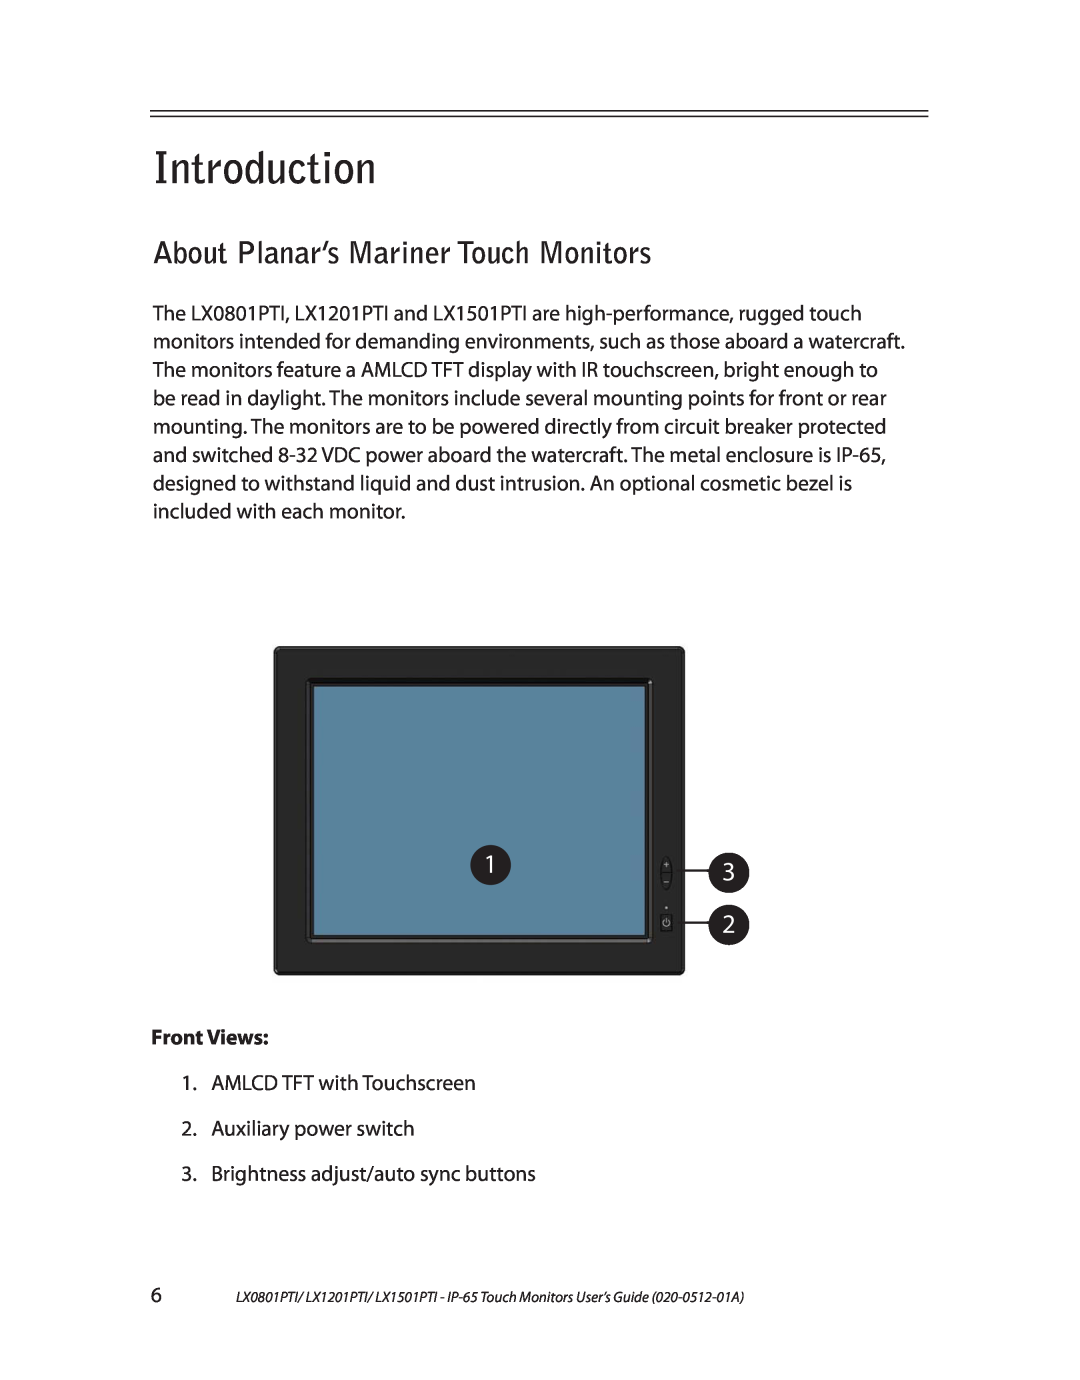 Planar LX0801PTI, LX1201PTI, LX1501PTI manual Introduction, About Planar’s Mariner Touch Monitors, Front Views 